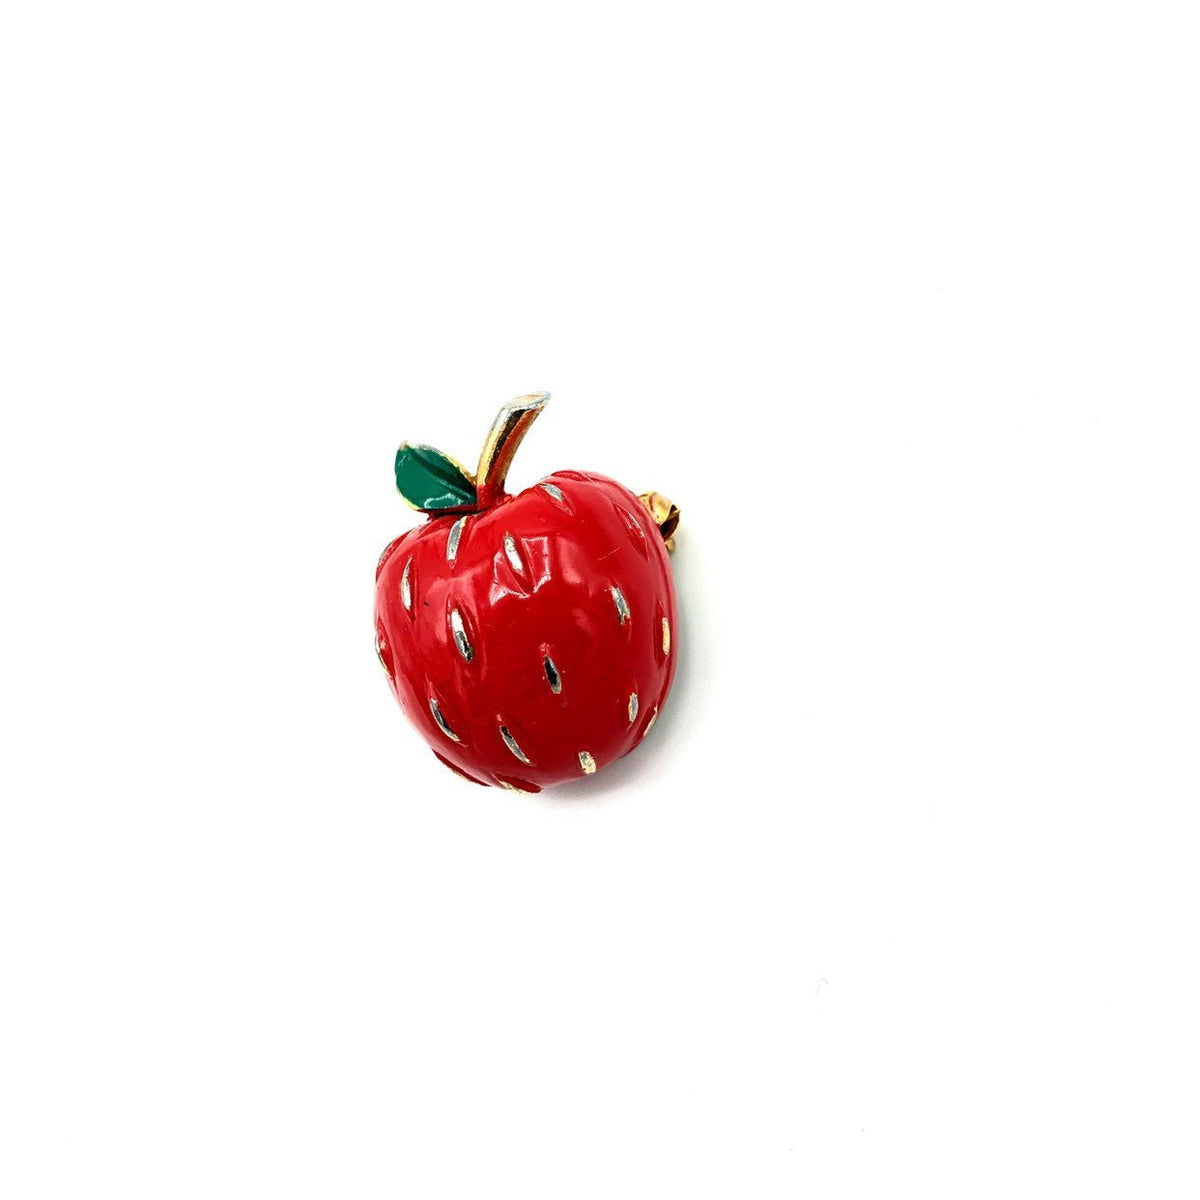 Petite Red Enamel Apple Vintage Brooch by Napier - 24 Wishes Vintage Jewelry